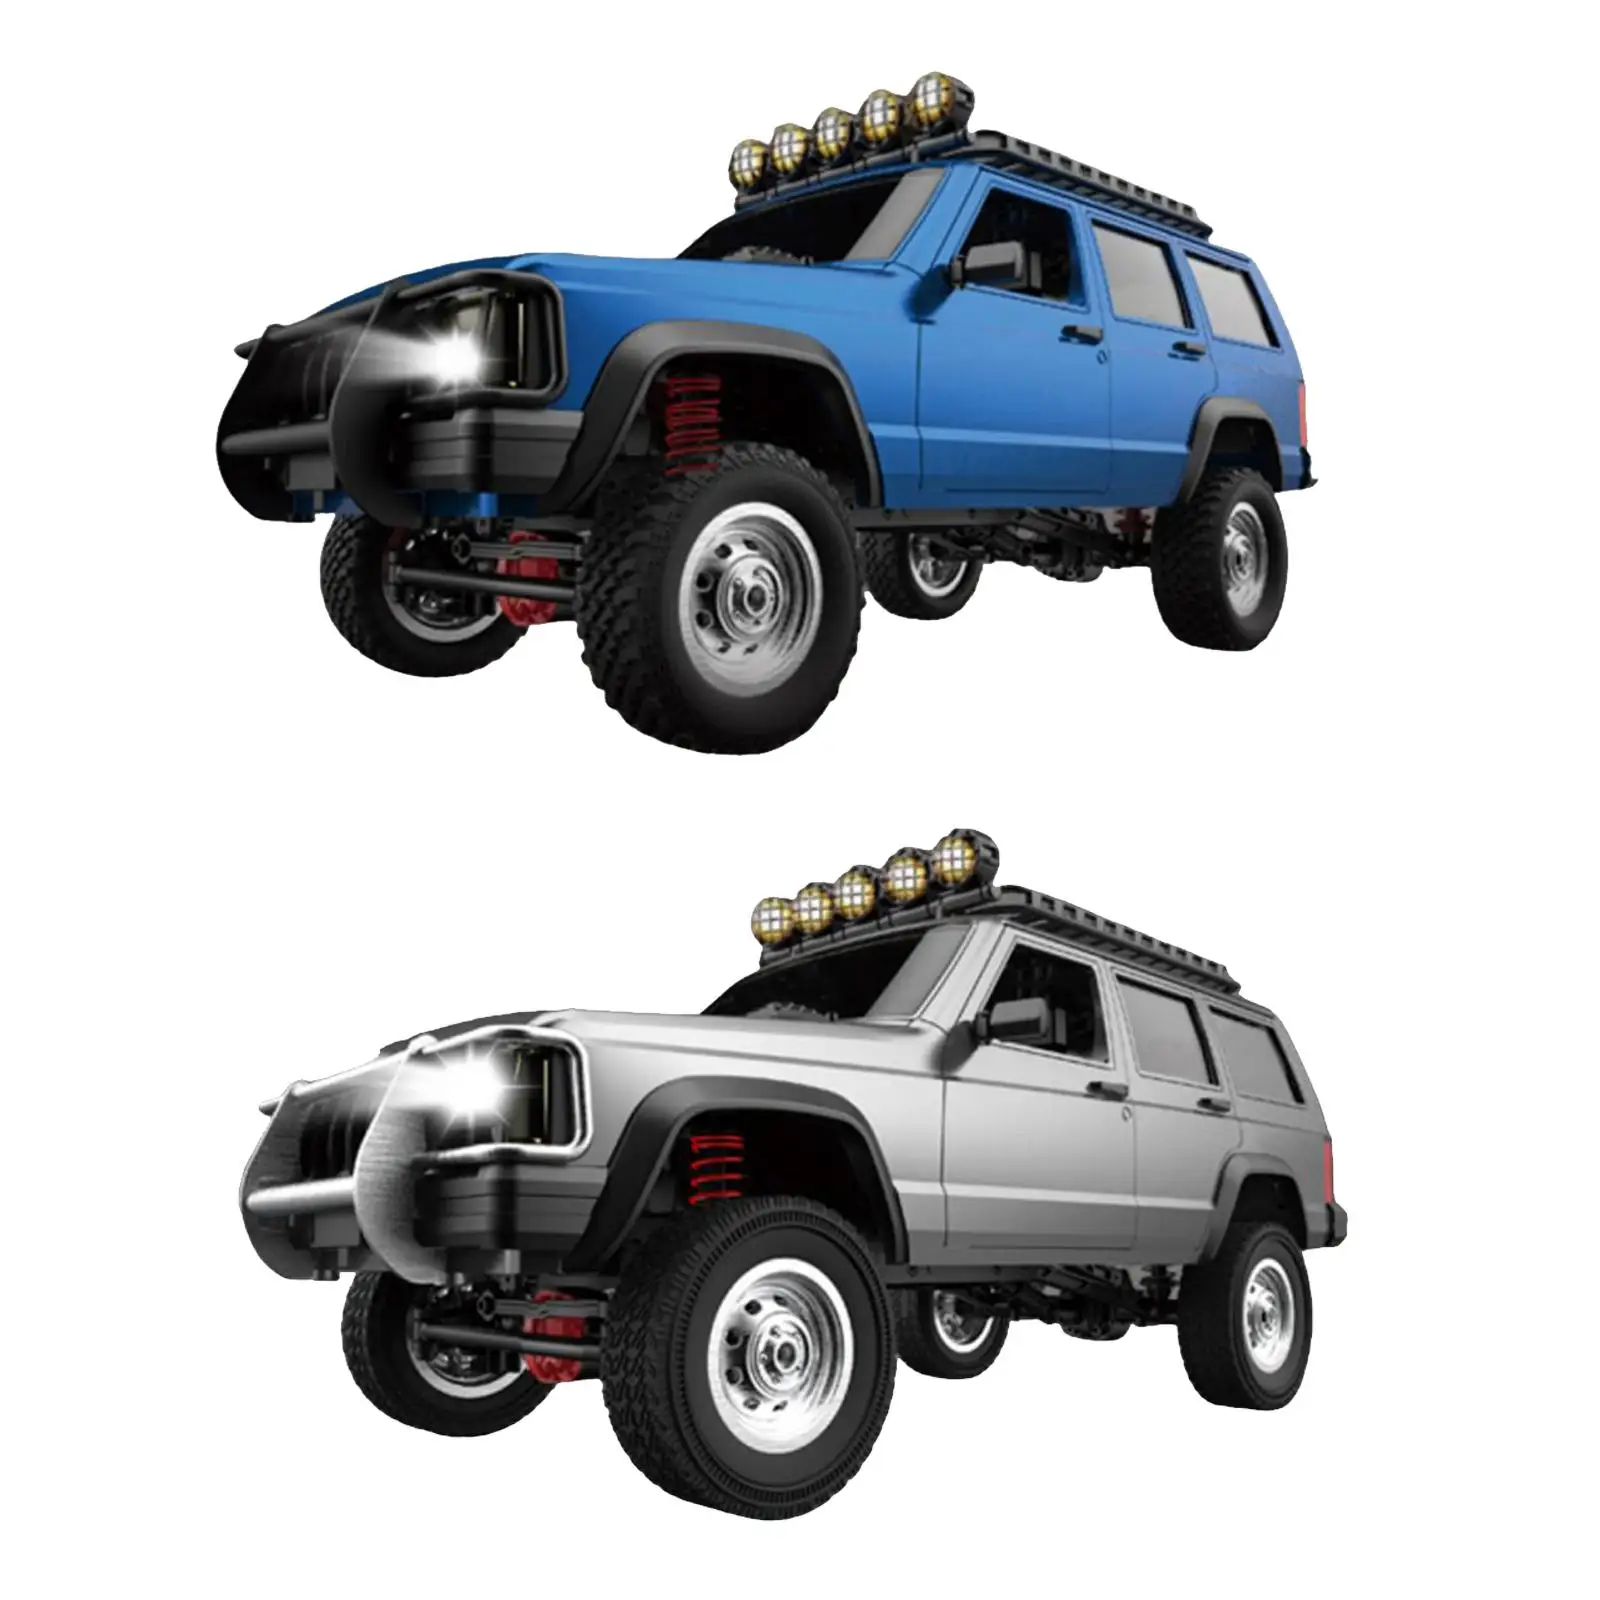 Huge 1:12 RC Car with Battery LED Headlight All Terrain Toy trucks Crawler Remote Control for Children Boys Adult